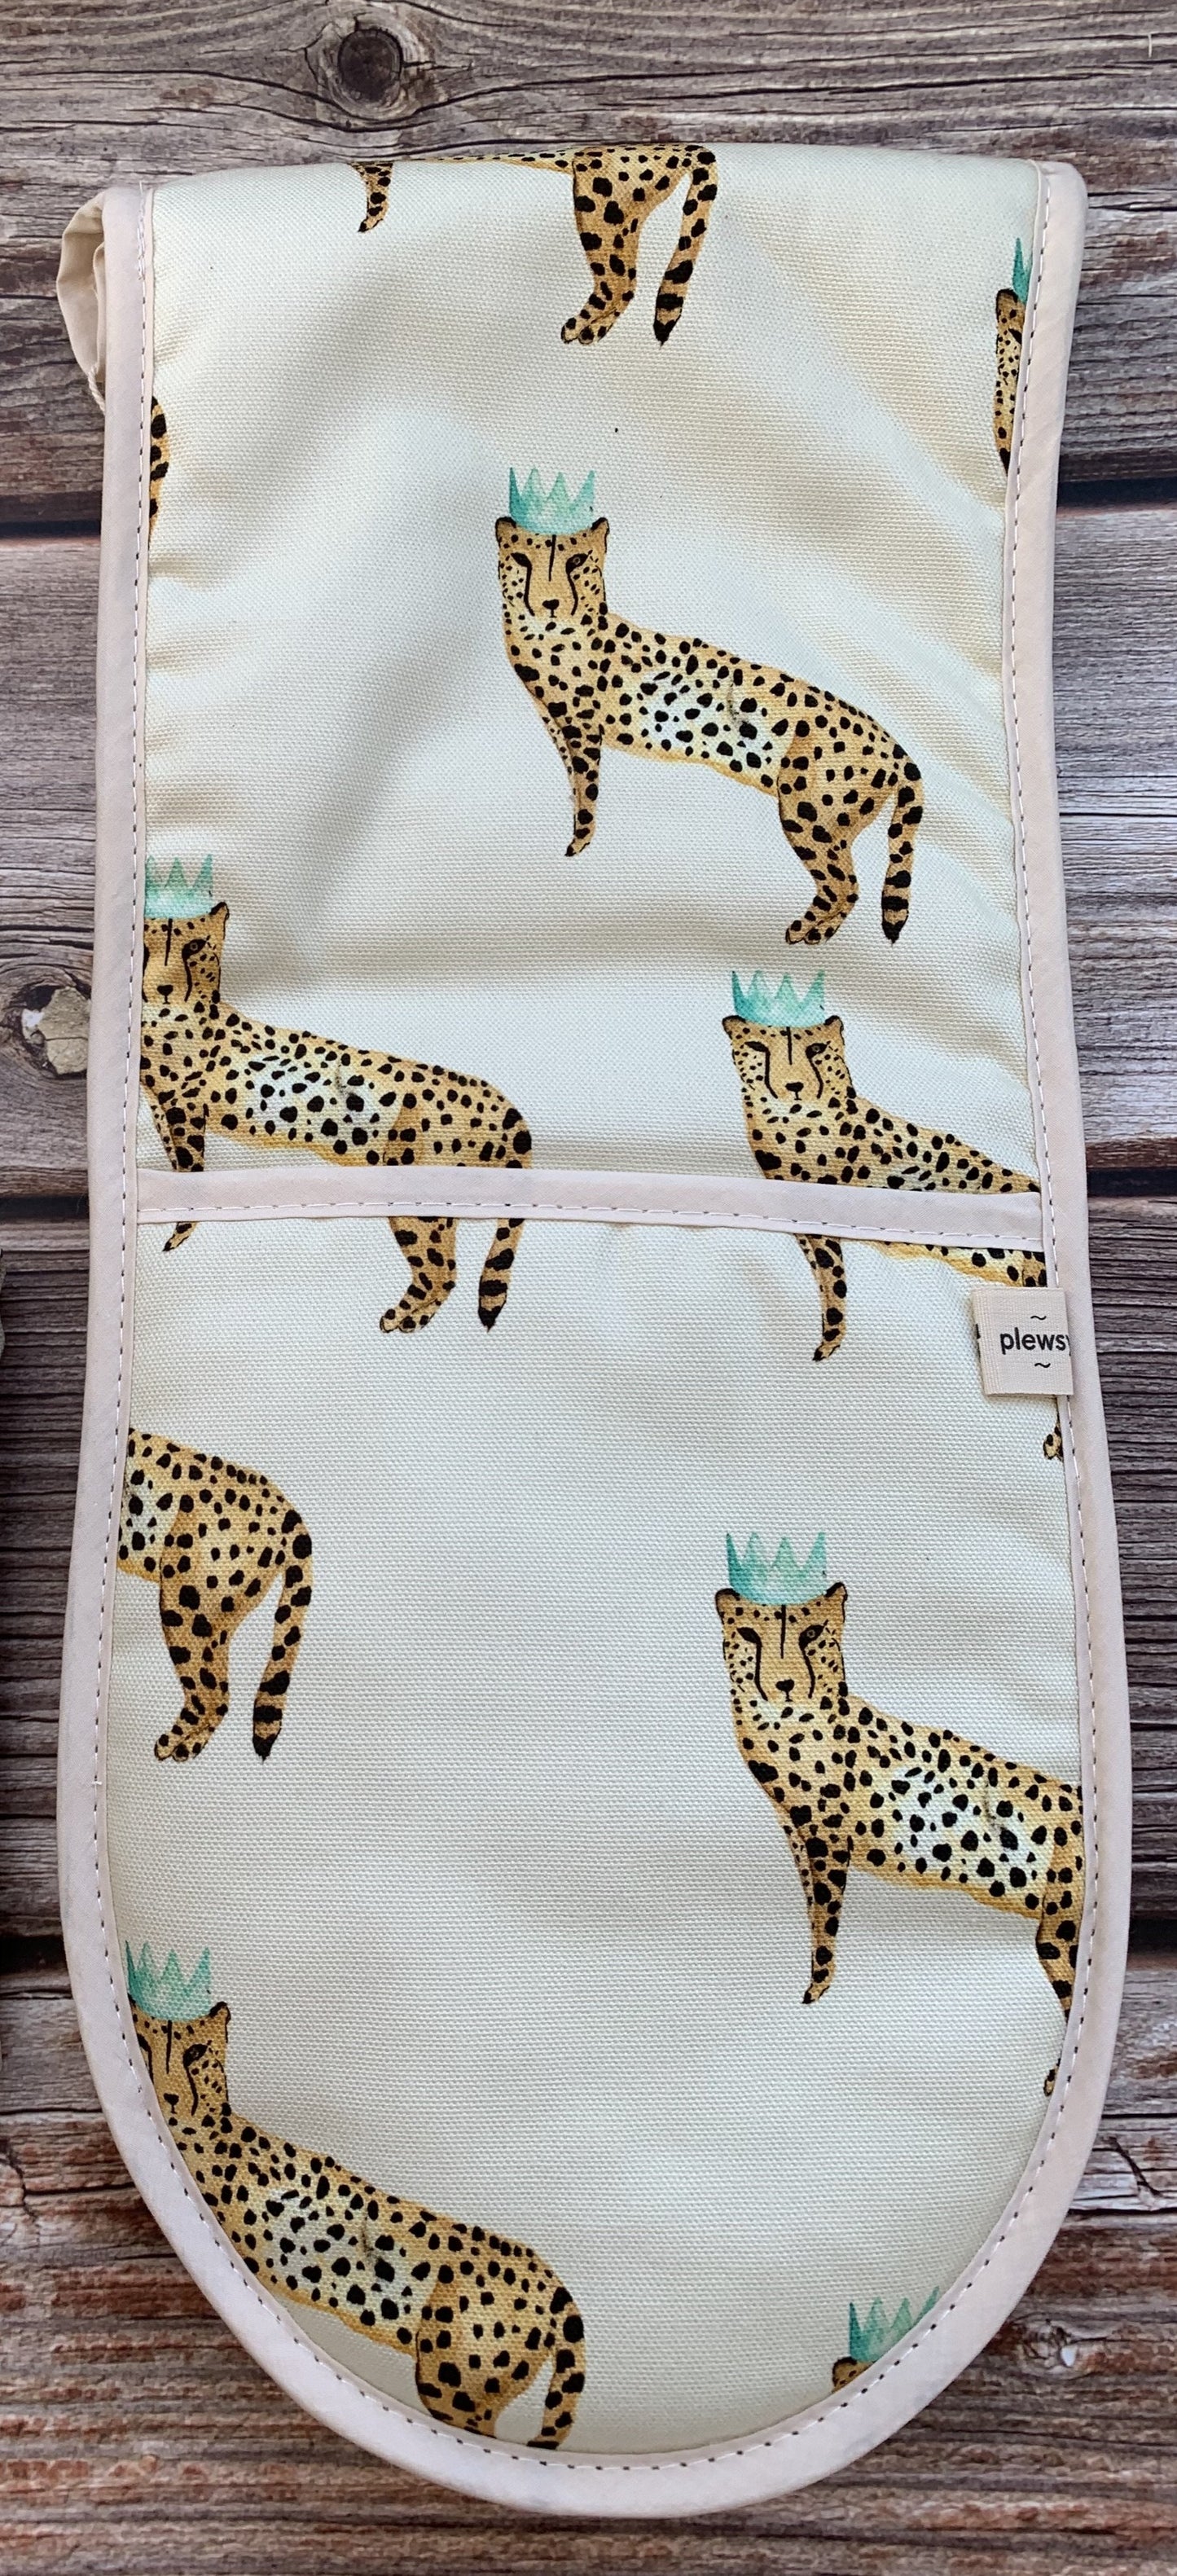 Cheetah Print Oven Glove on wooden background